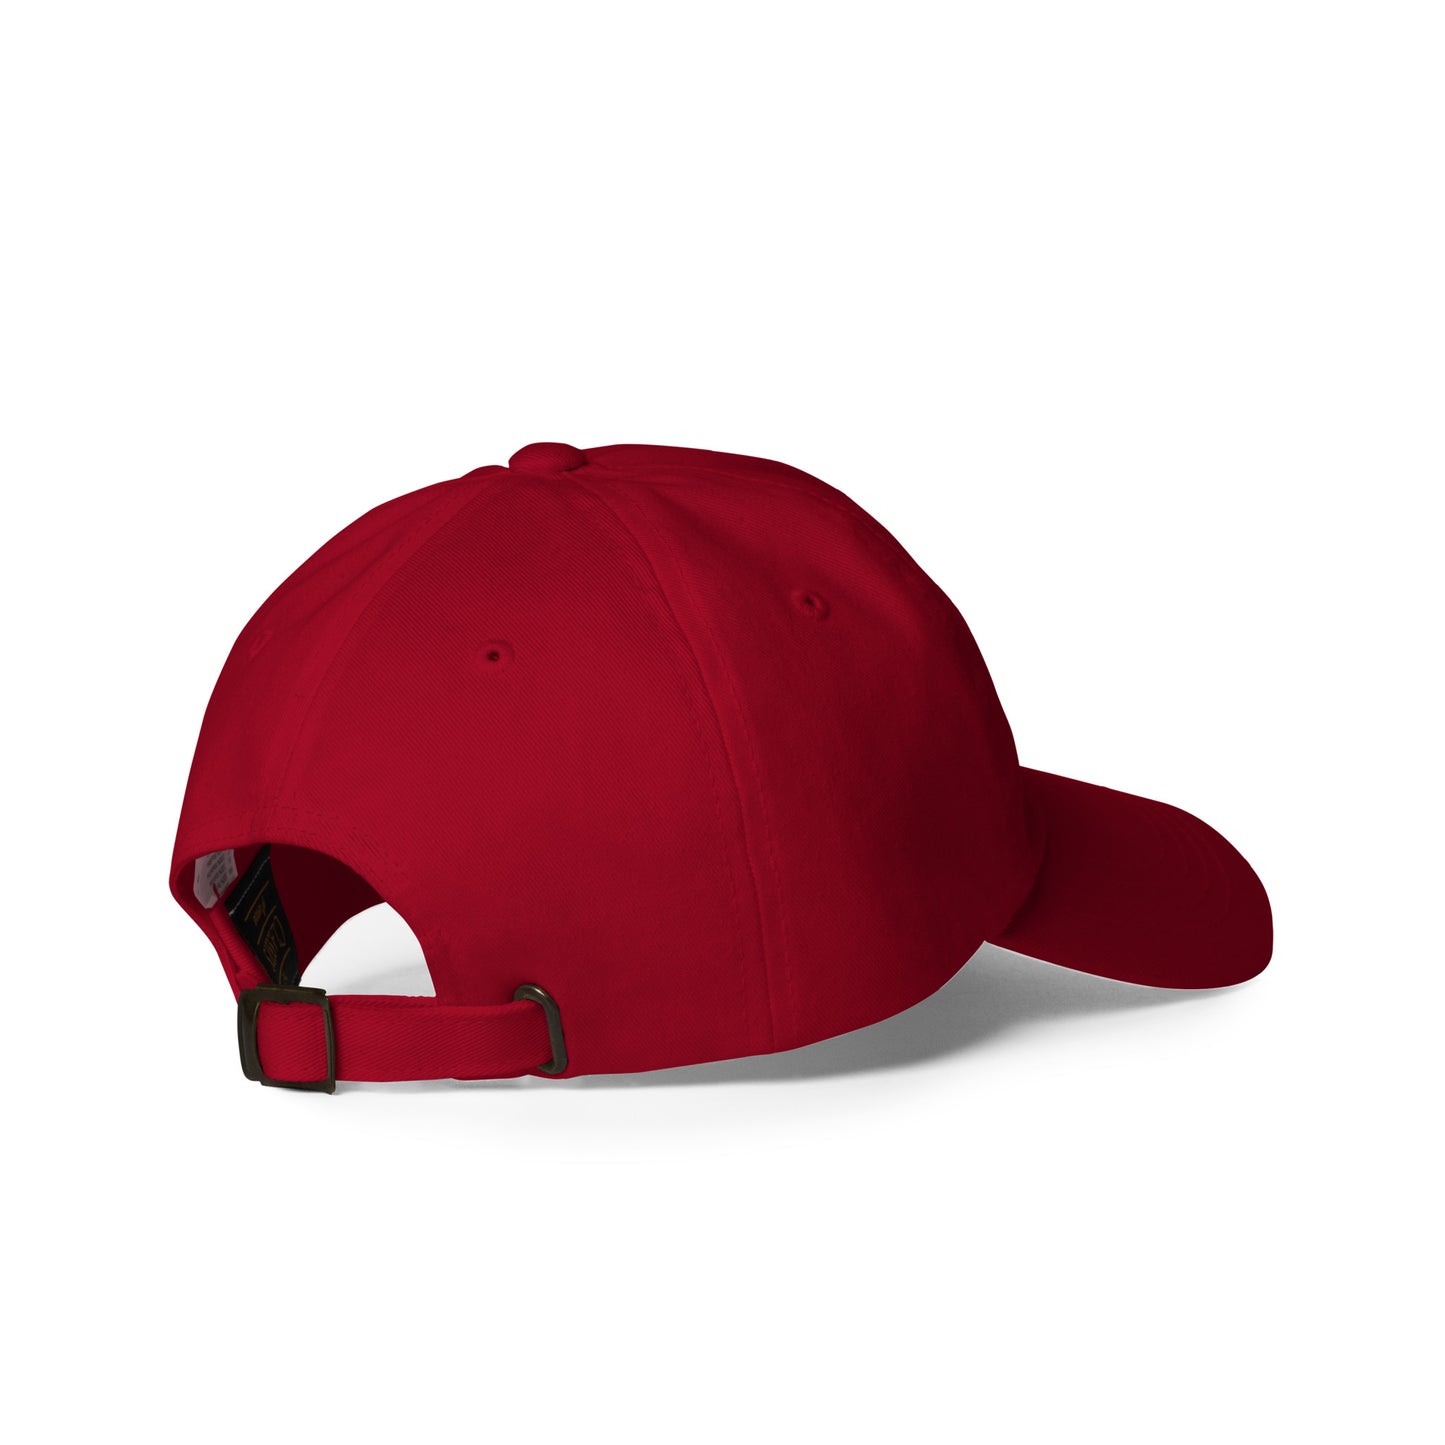 Wildfire Cigars embroidered dad hat in cranberry facing back right